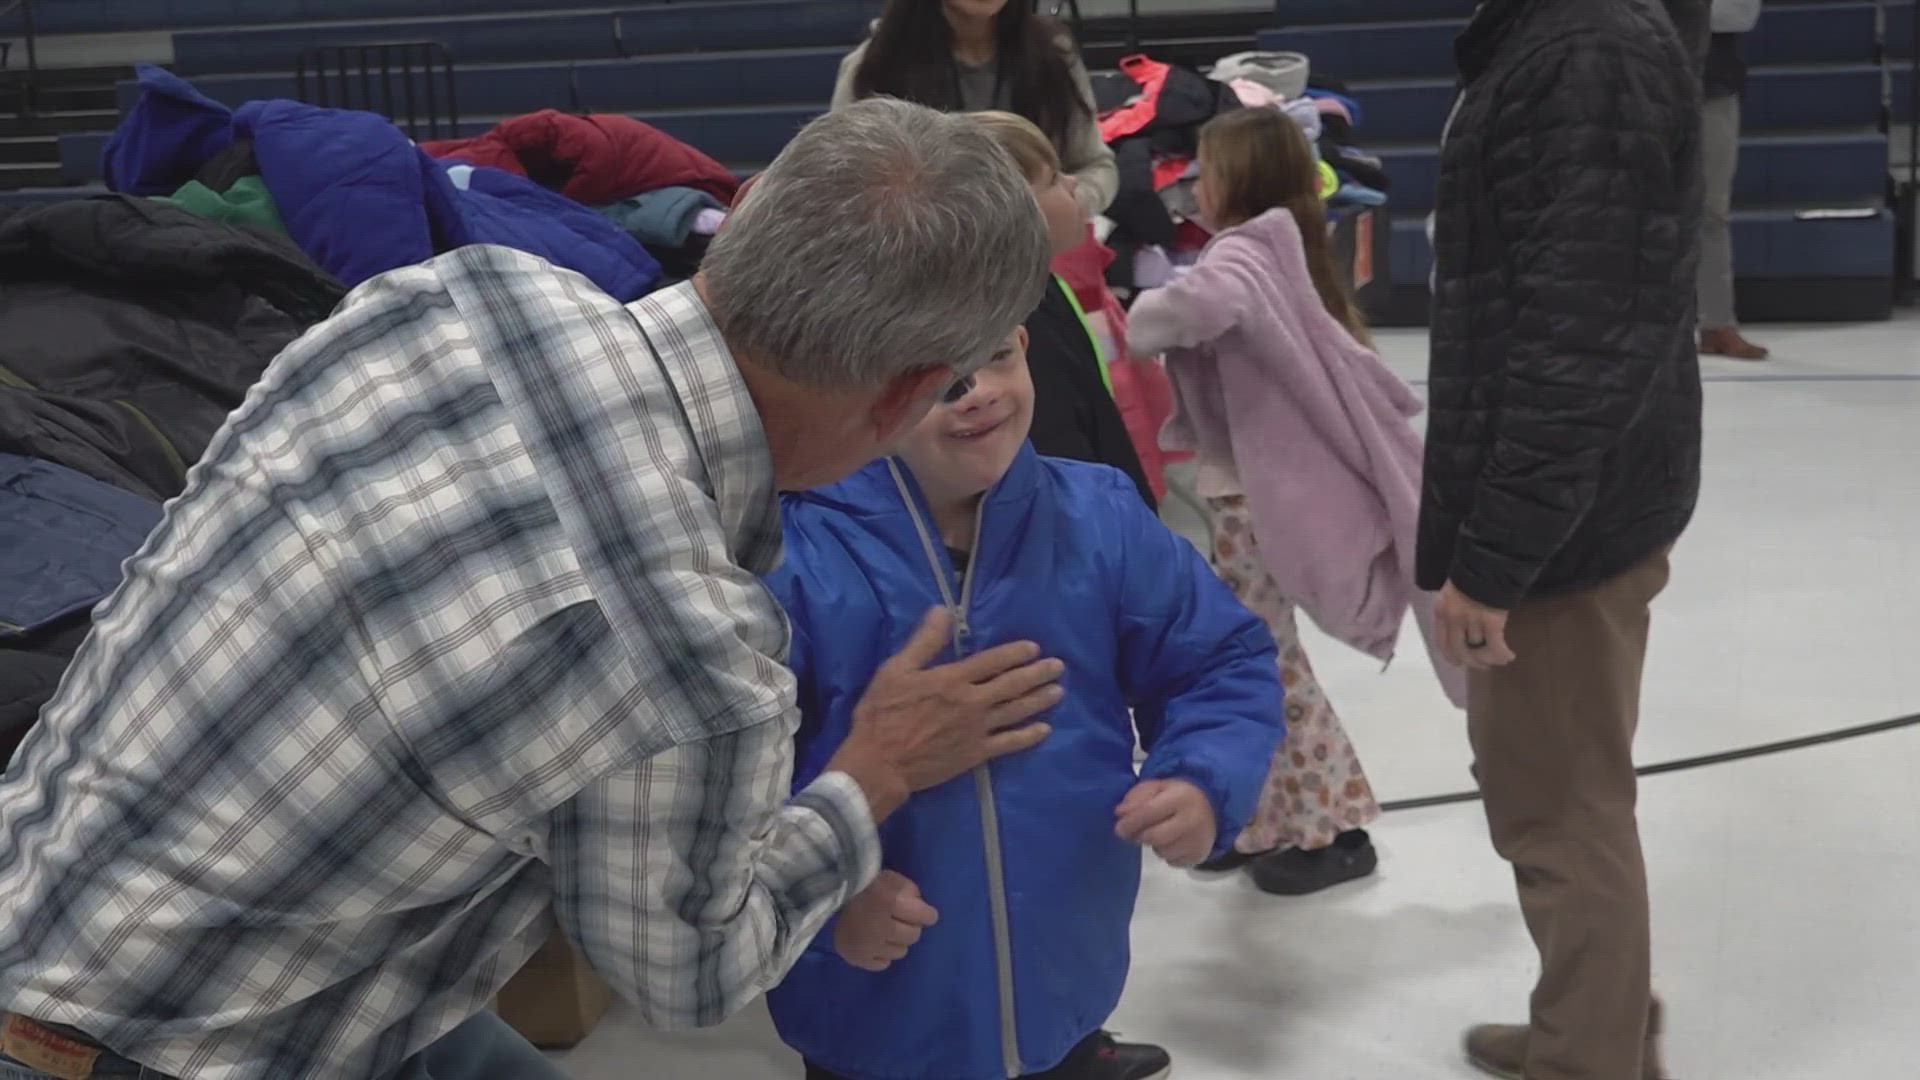 Students in the Hancock County School District received free winter coats on Wednesday, all a part of an initiative by the state's First Lady.